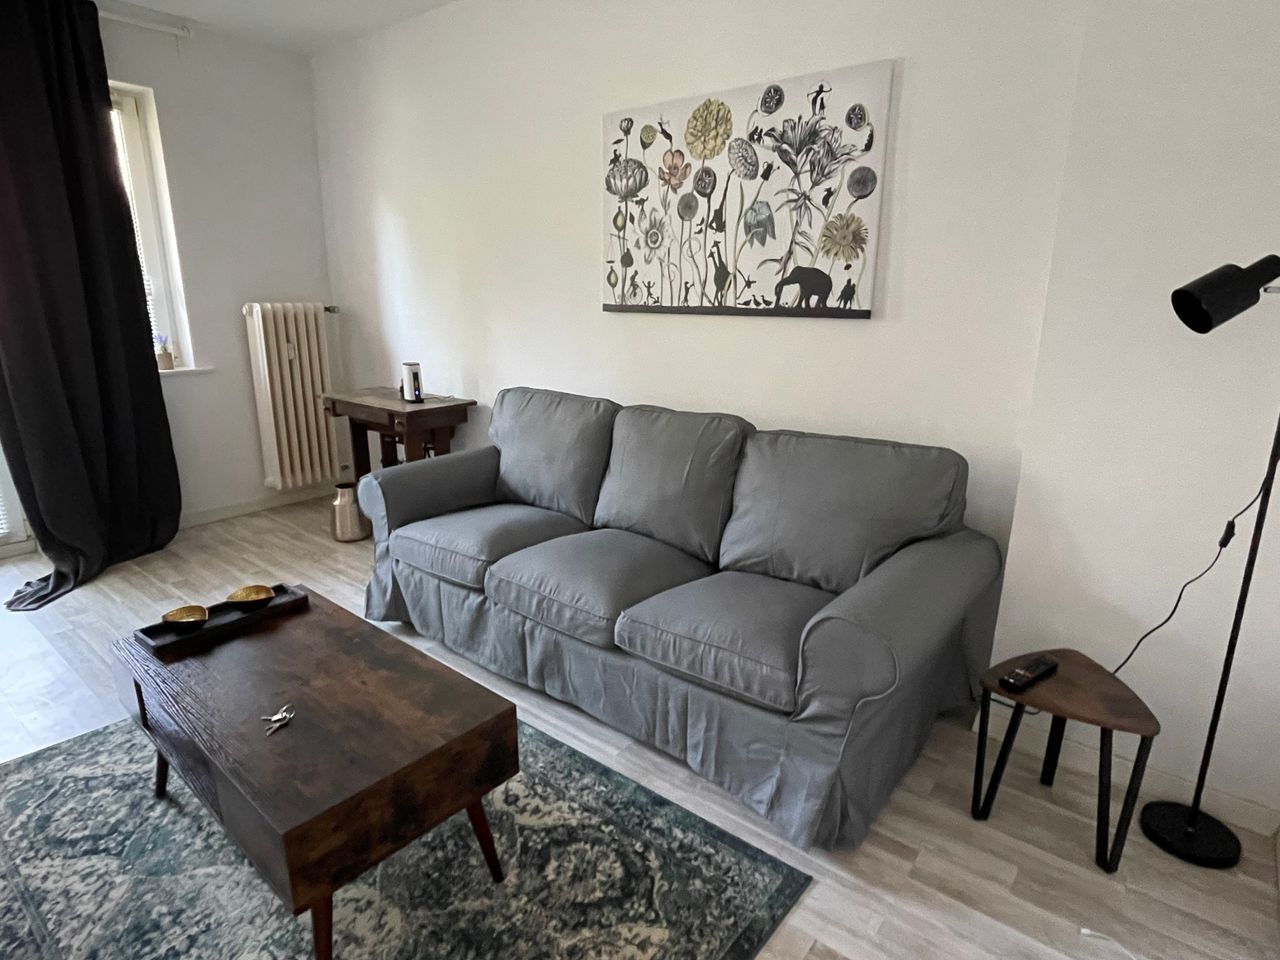 Furnished apartment, fully equipped, WiFi (Neukölln)